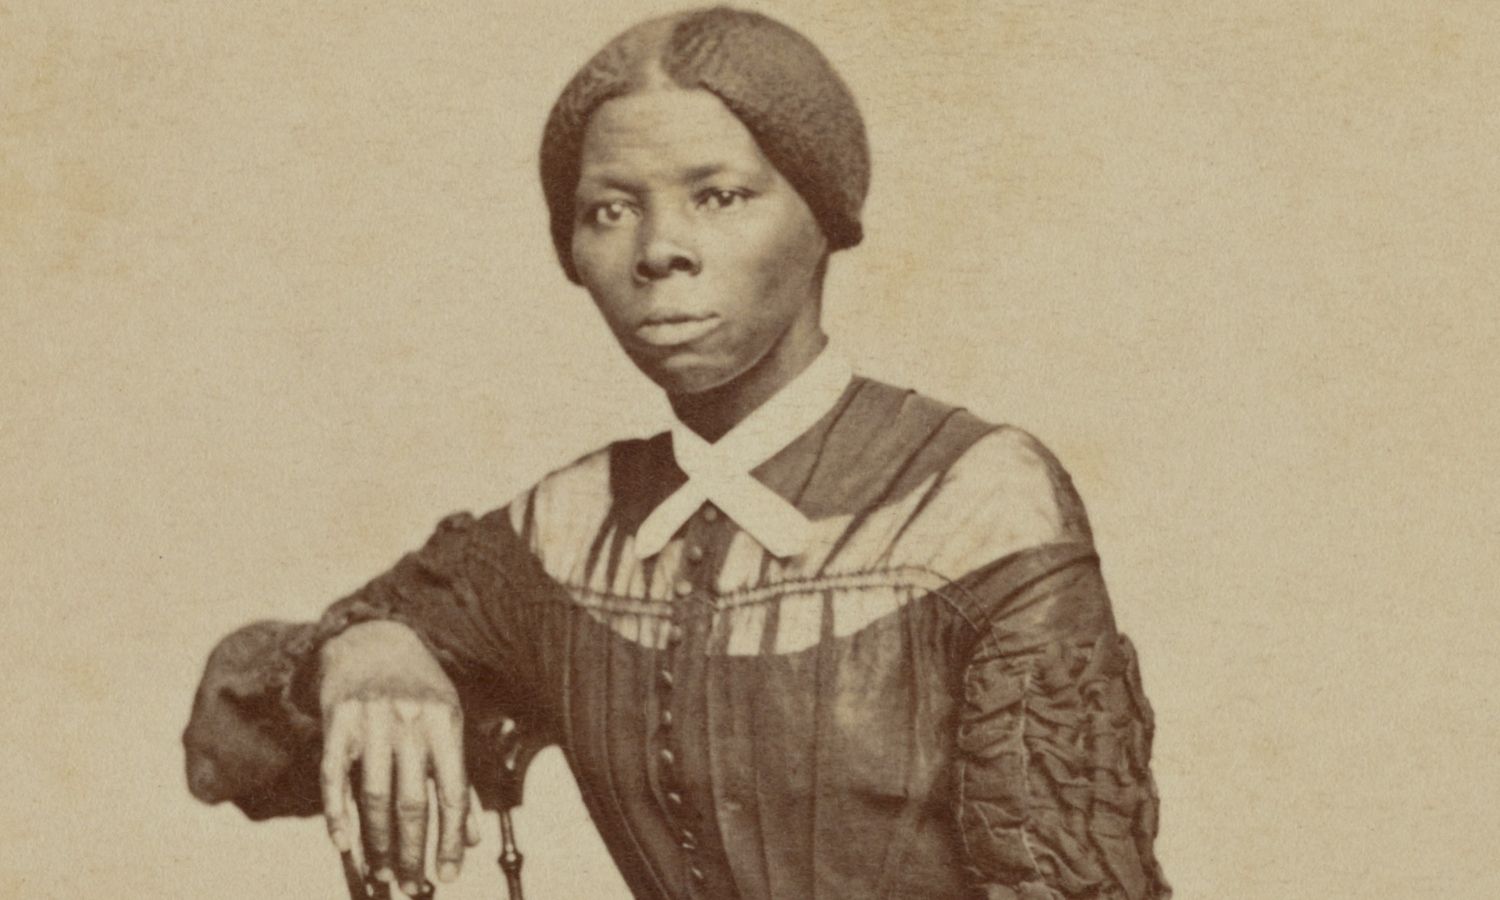 OTD in 1849: Harriet Tubman escaped from slavery.